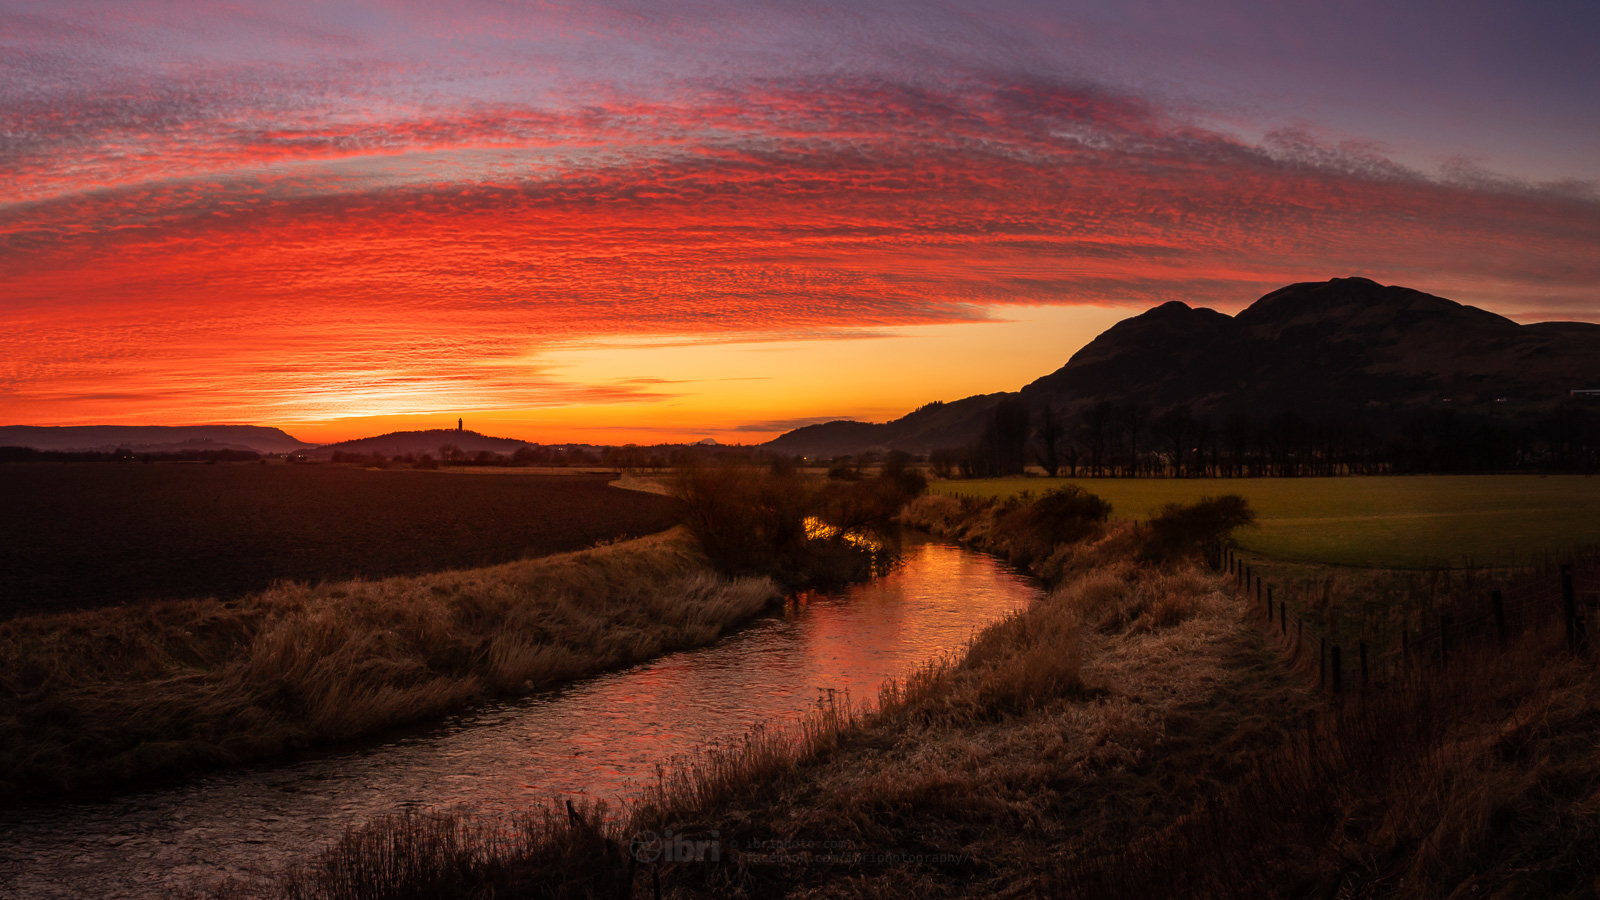 2nd Place Altocumulus sunset over Clackmannanshire near Sterling by Brian Smith @iBri_Photo